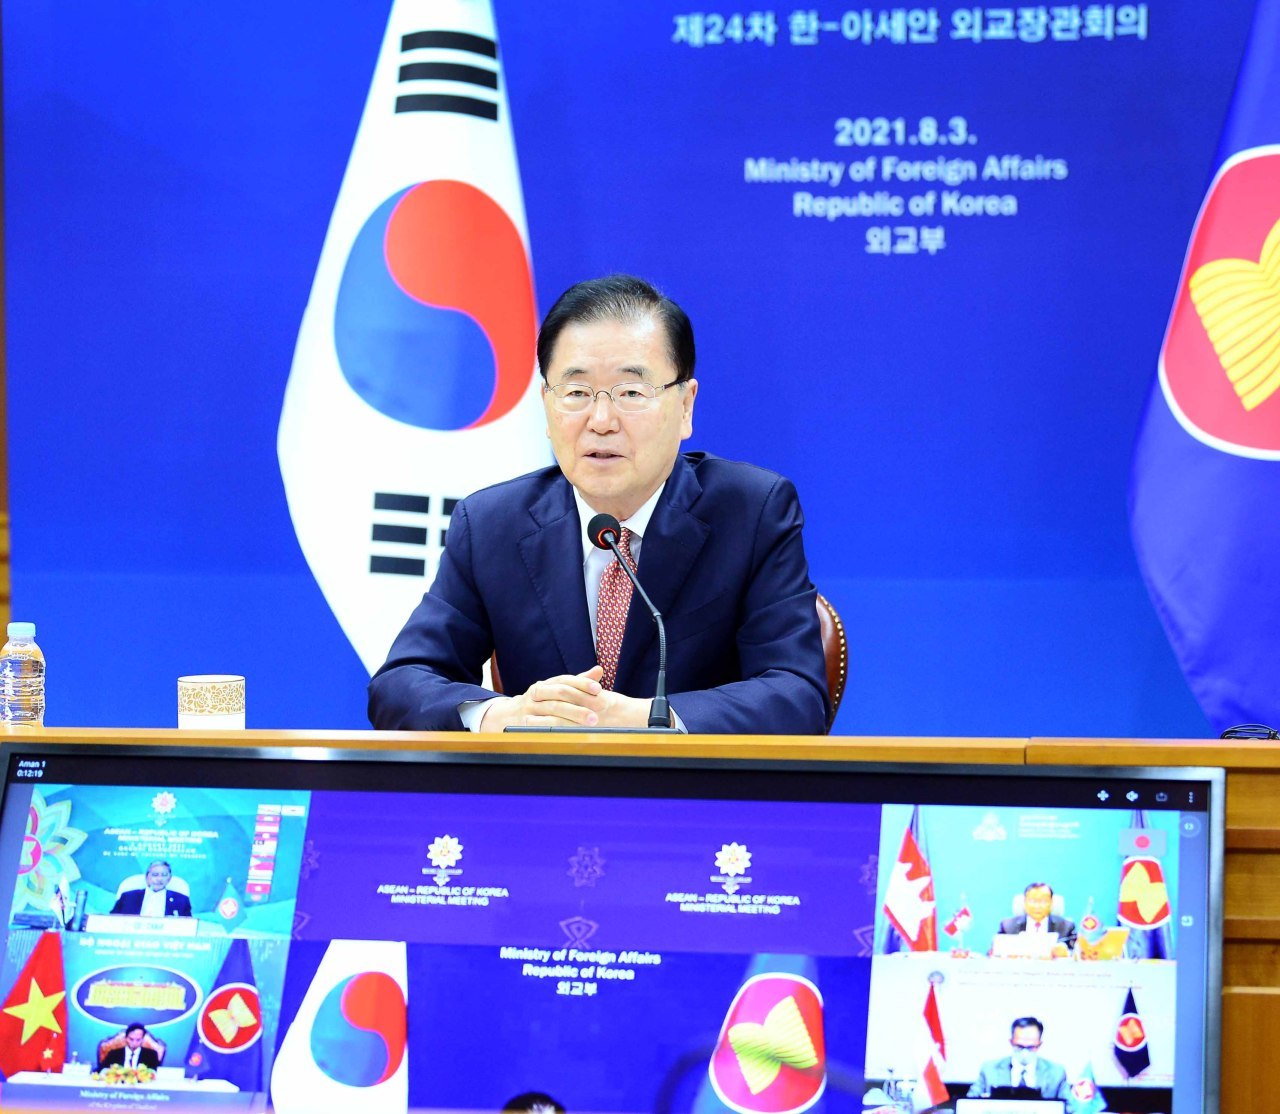 South Korean Foreign Minister Chung Eui-yong speaks during the South Korea-ASEAN foreign ministerial meeting held virtually at the Ministry of Foreign Affairs in Seoul on Tuesday. (Ministry of Foreign Affairs)